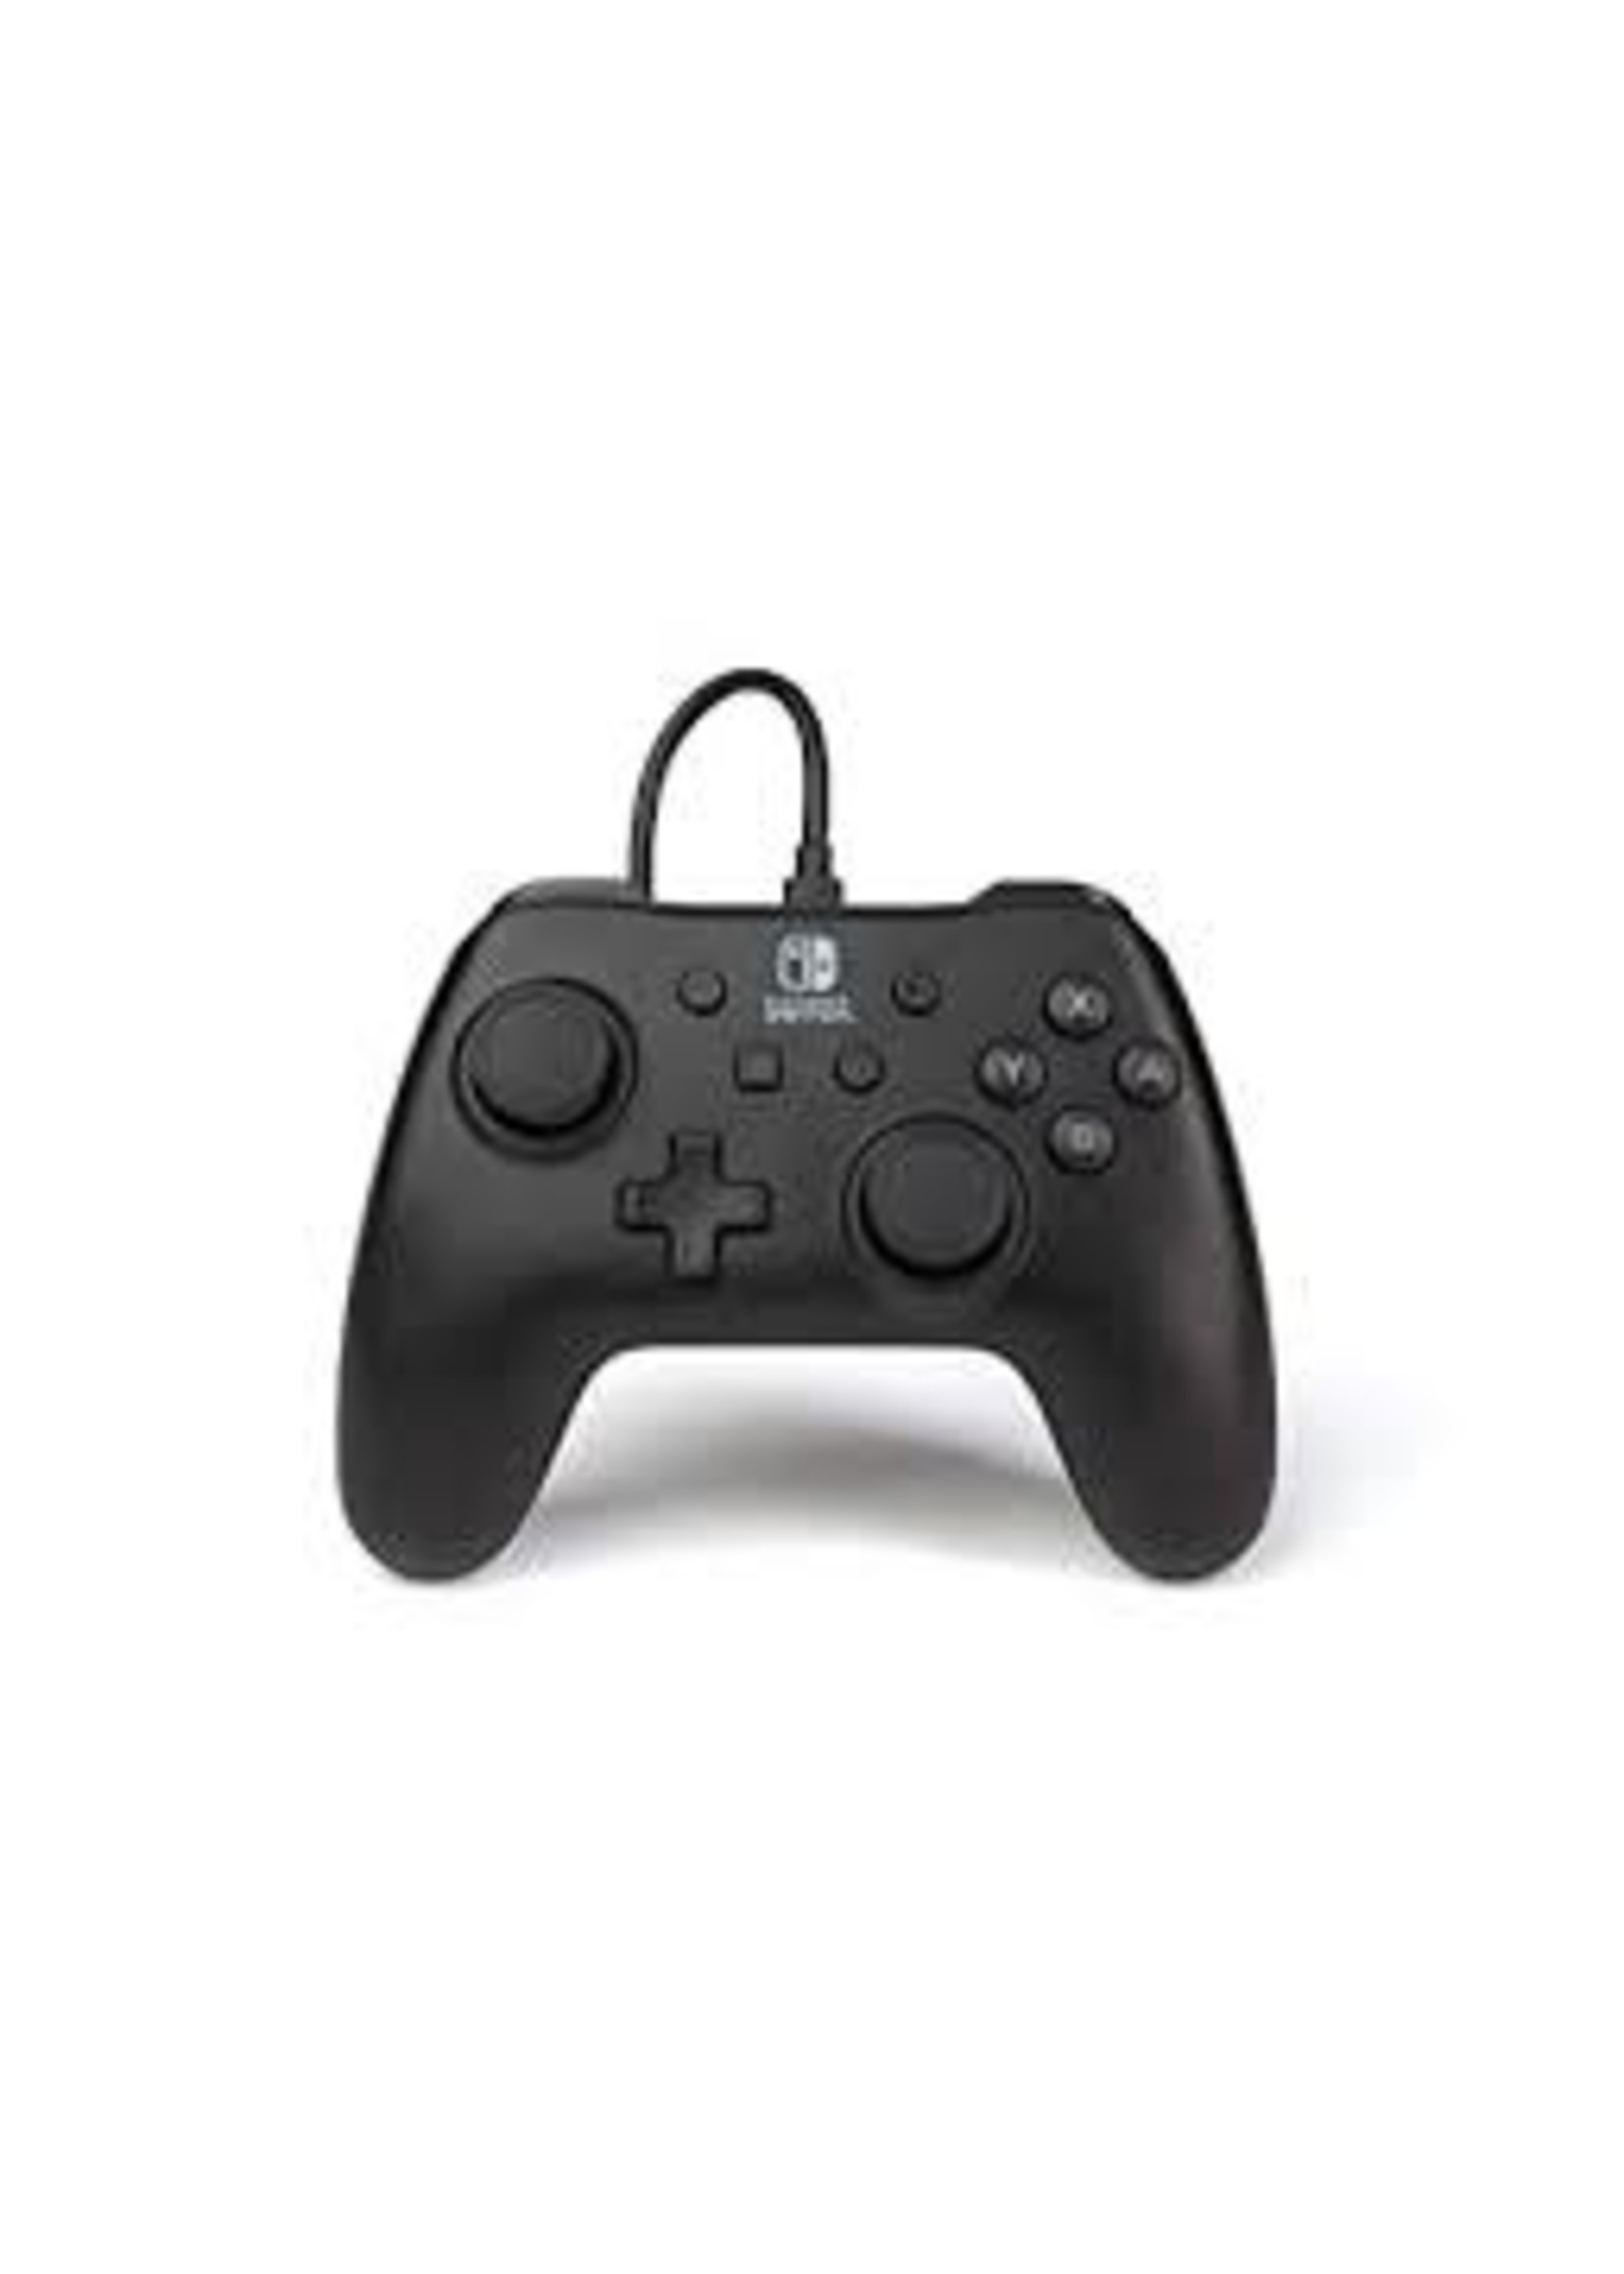 Nintendo Switch Nintendo Switch Wired Pro Controller (Used)